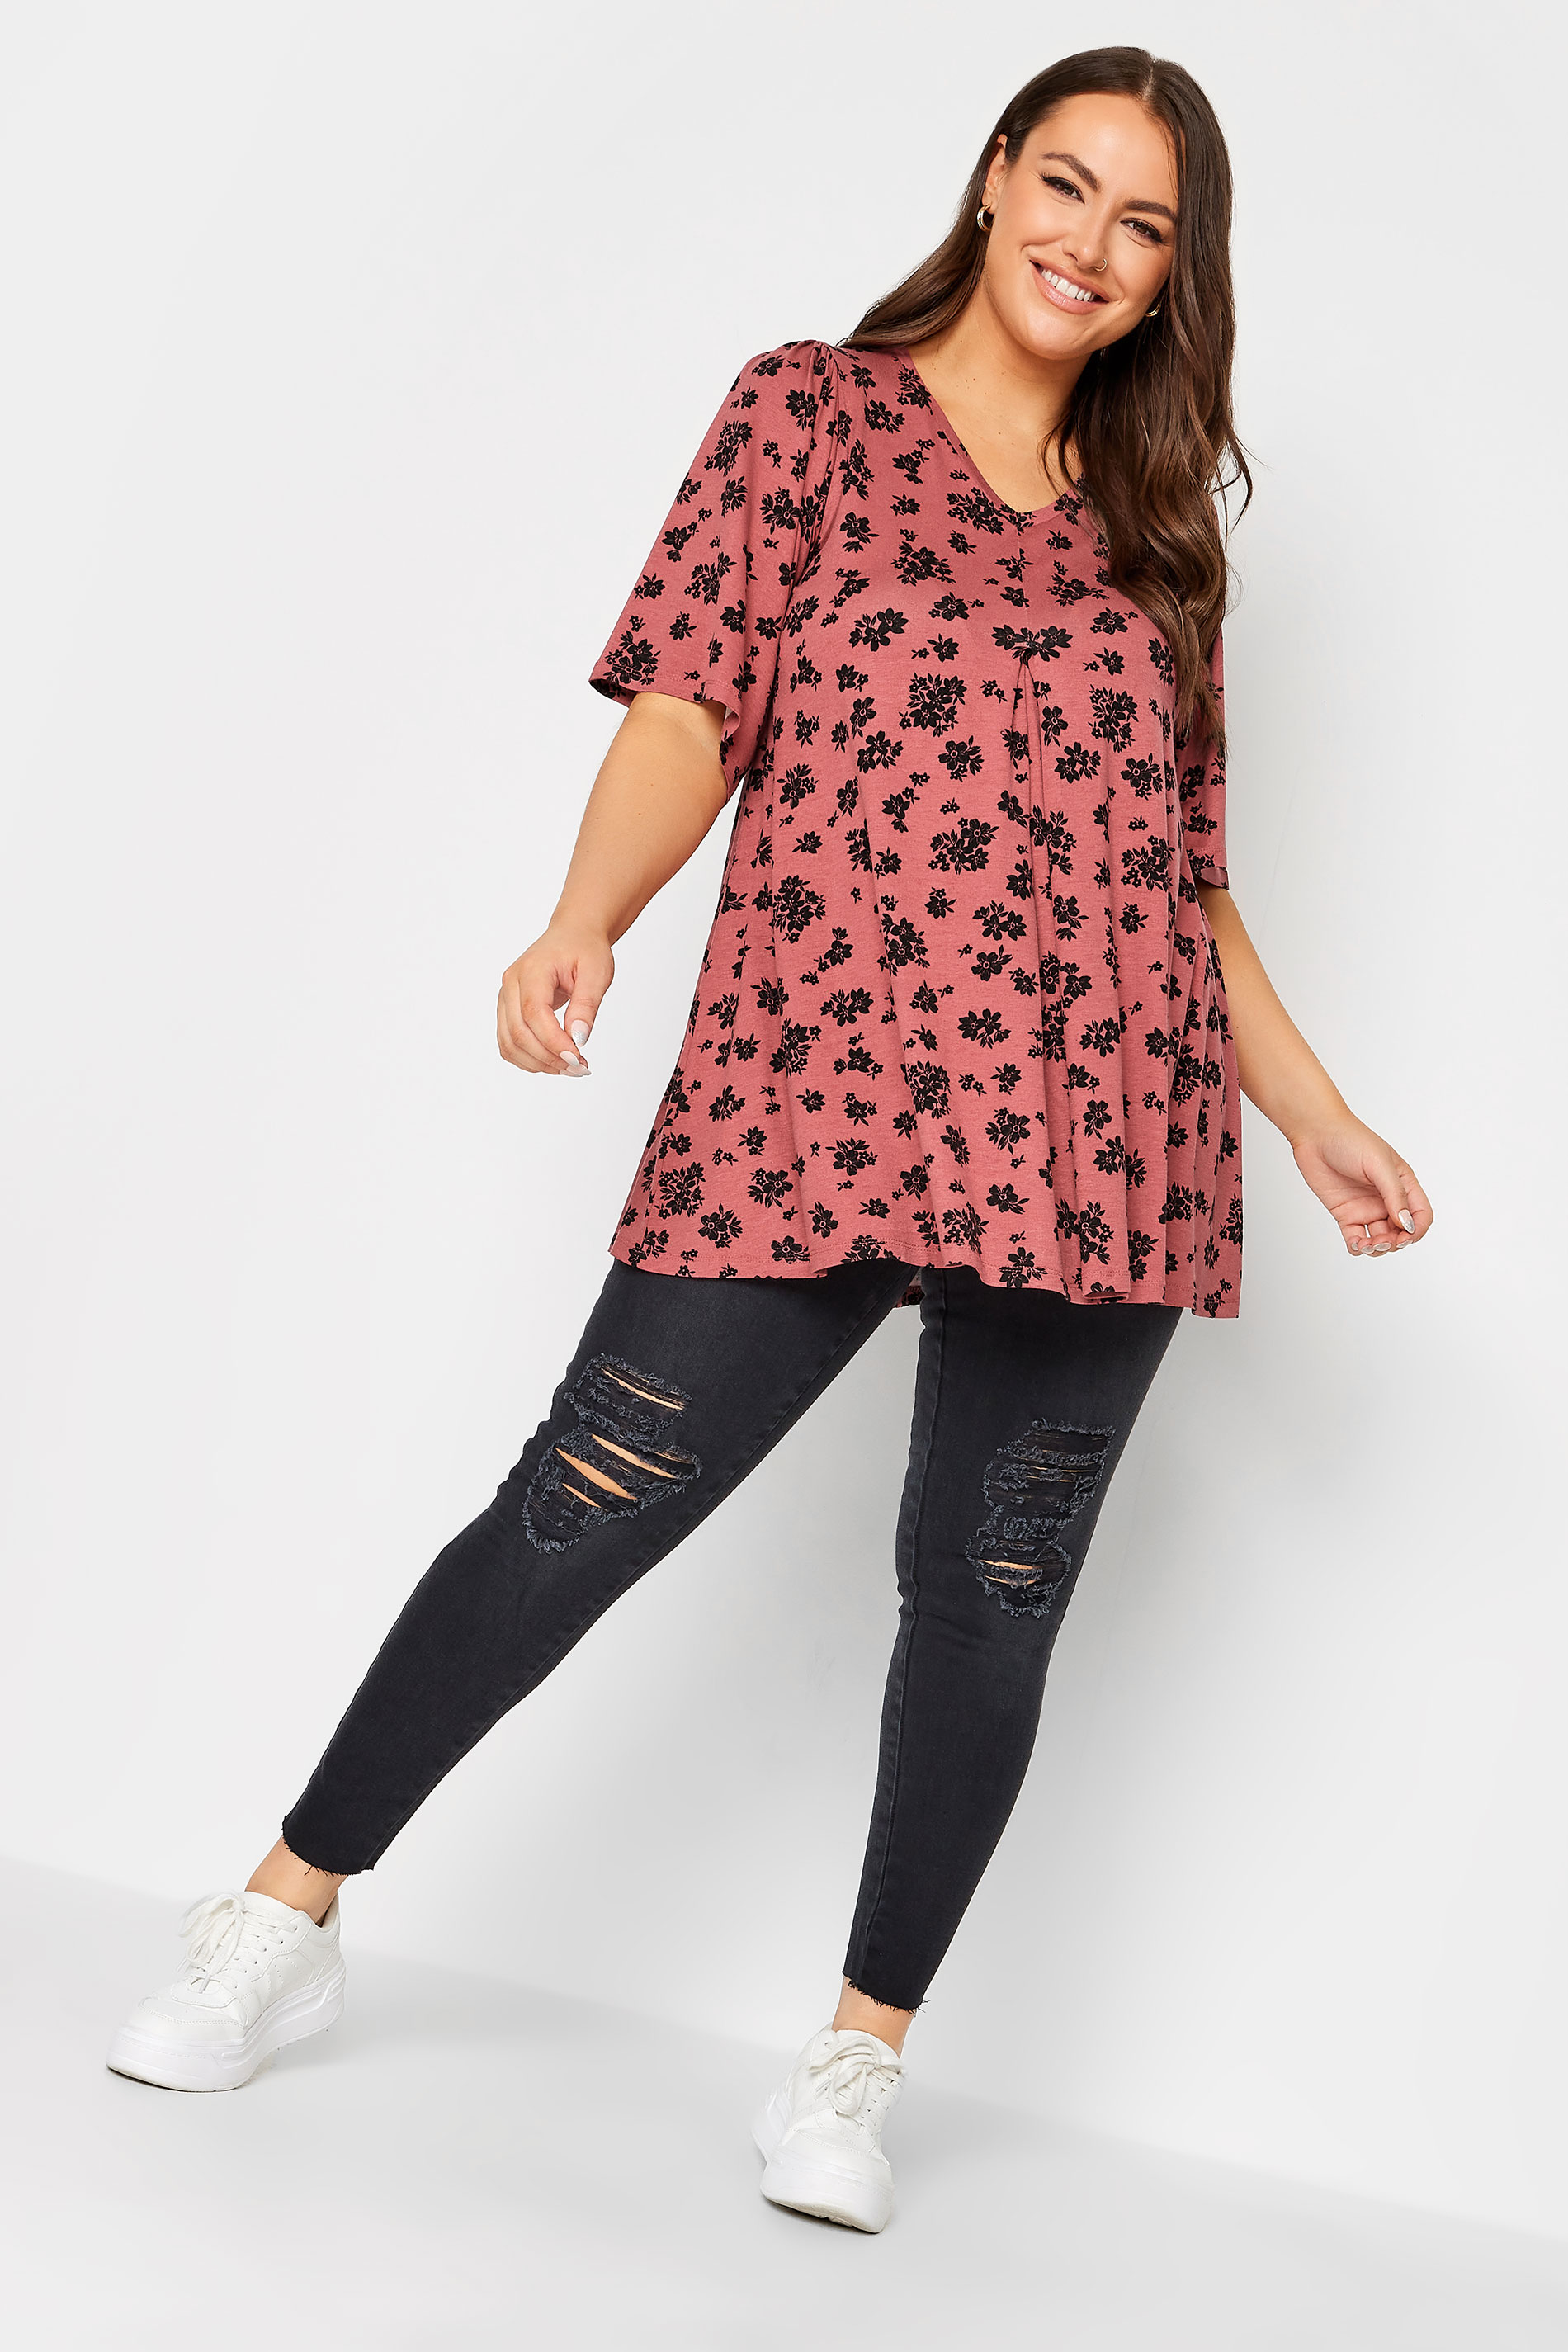 YOURS Plus Size Pink Floral Print Swing Top | Yours Clothing 2